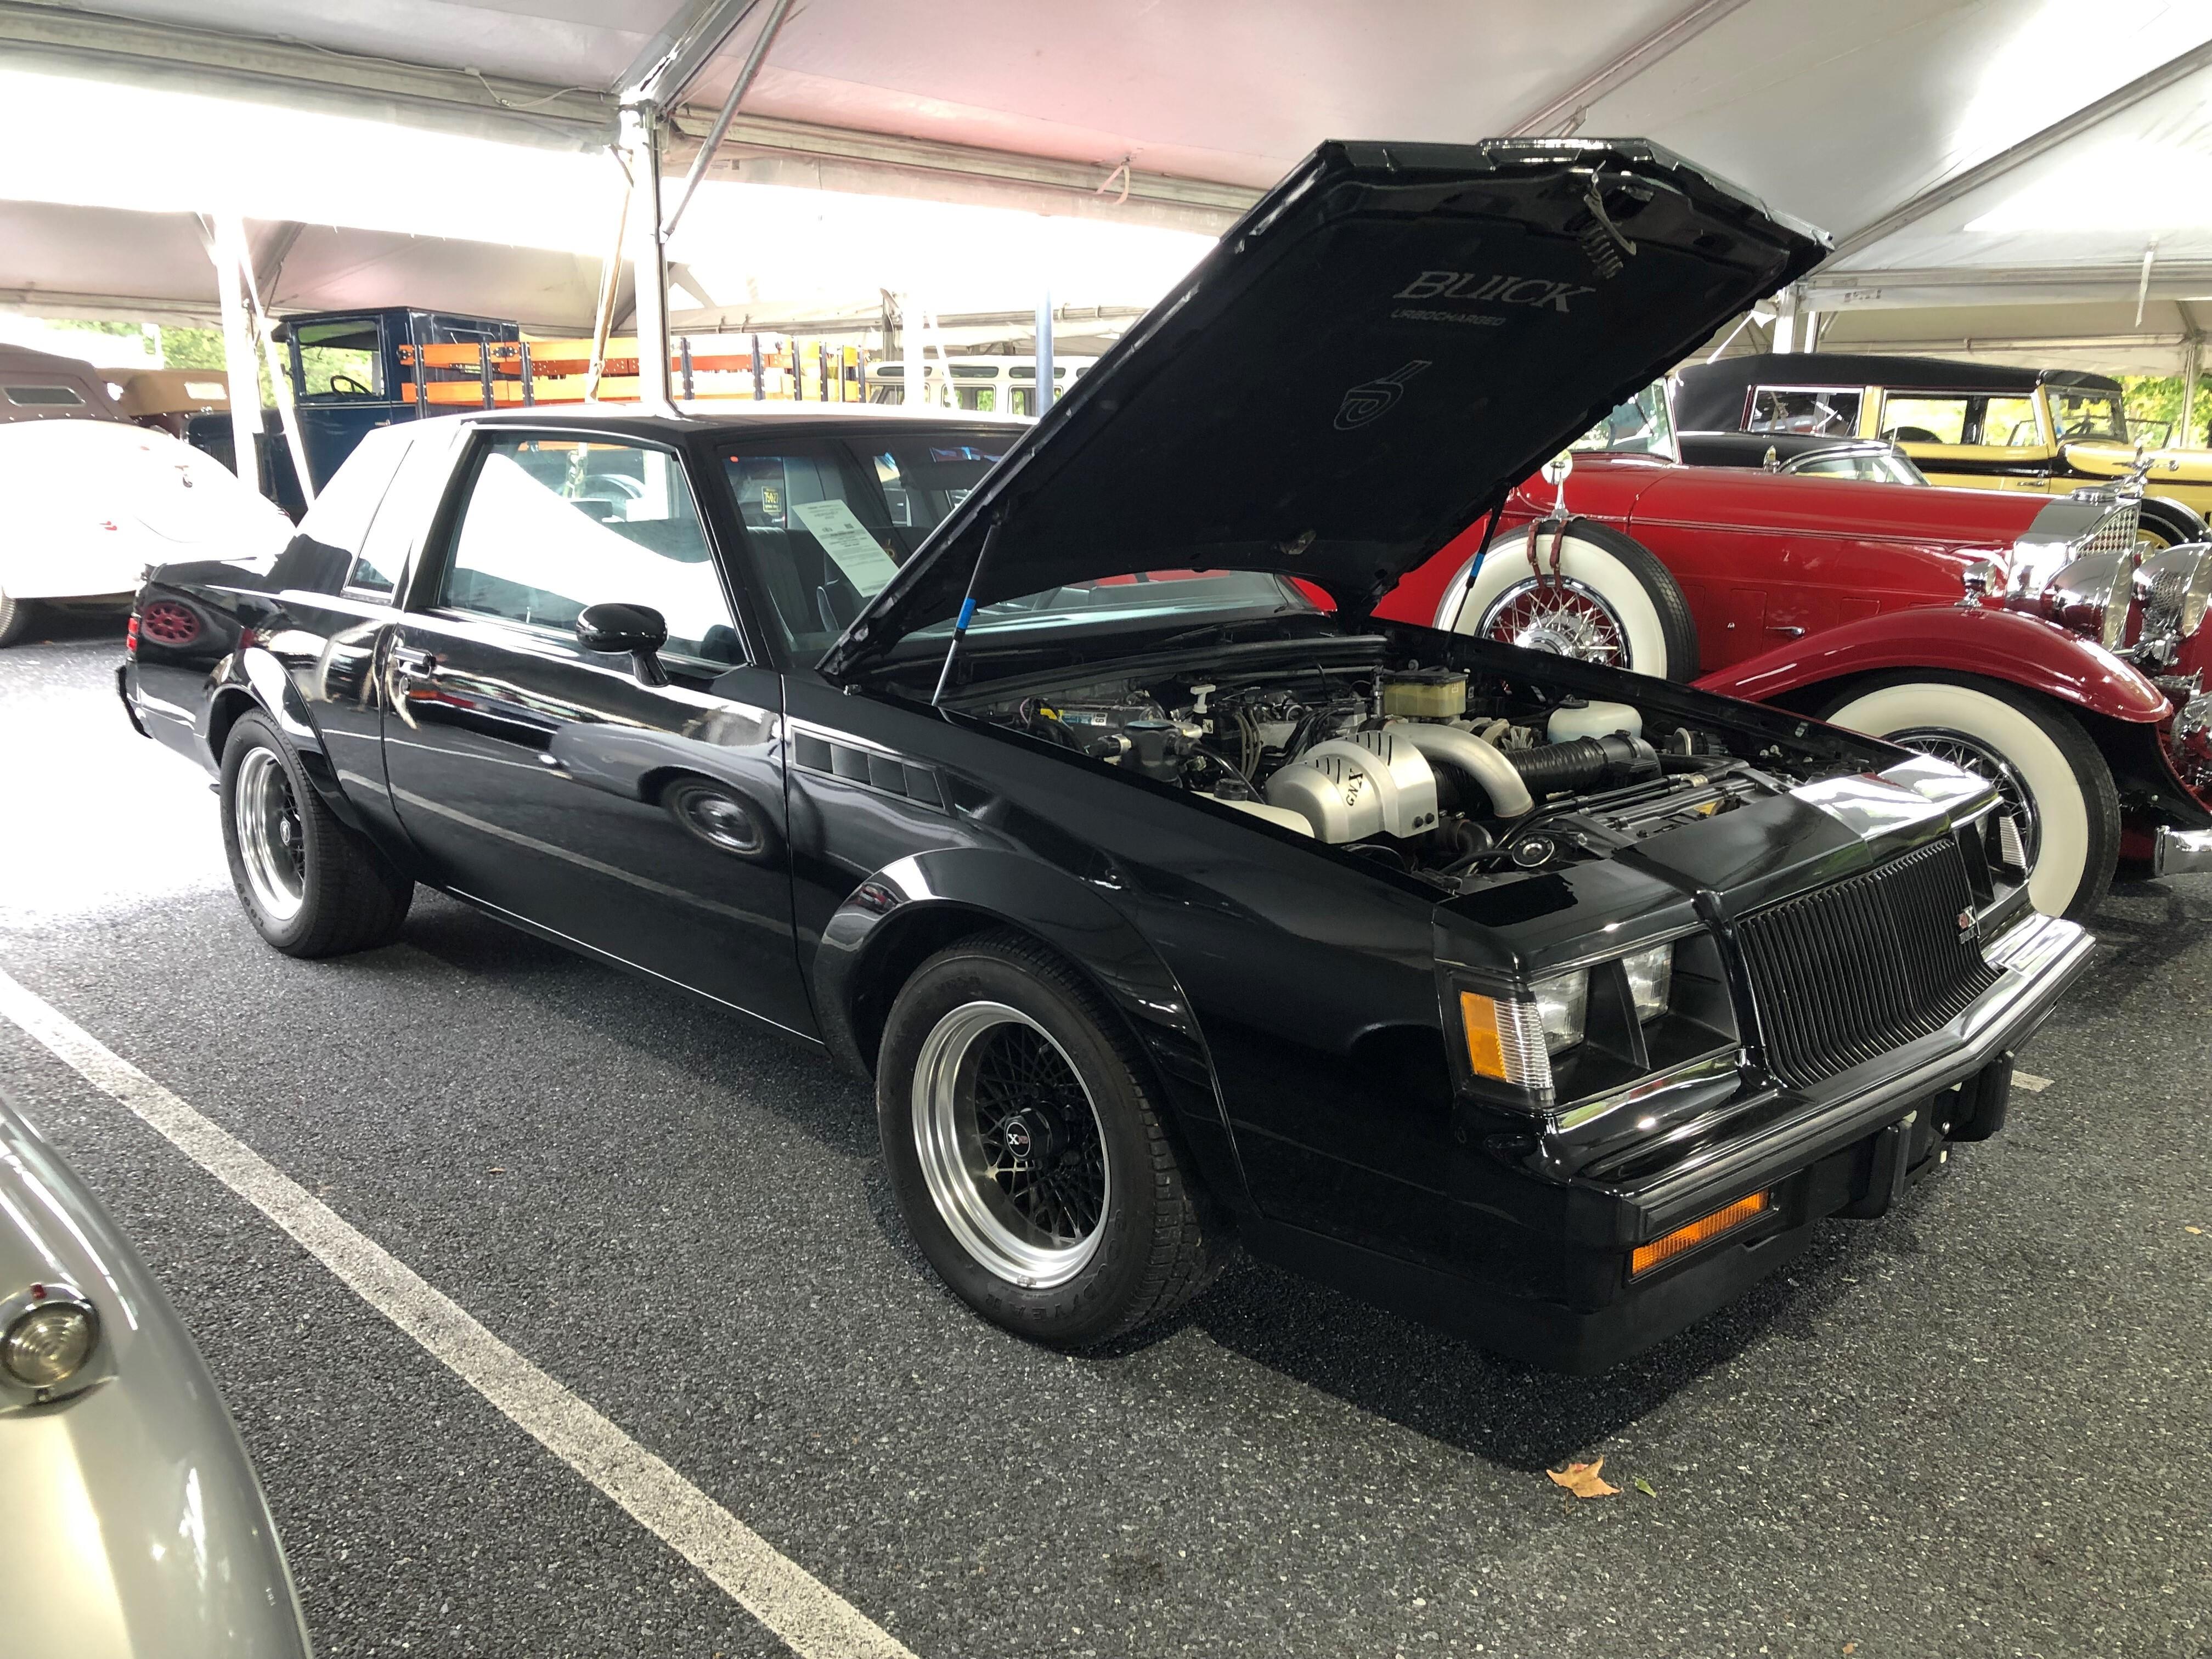 Buick GNX sales continue to climb with one selling for $231,000 at Hershey